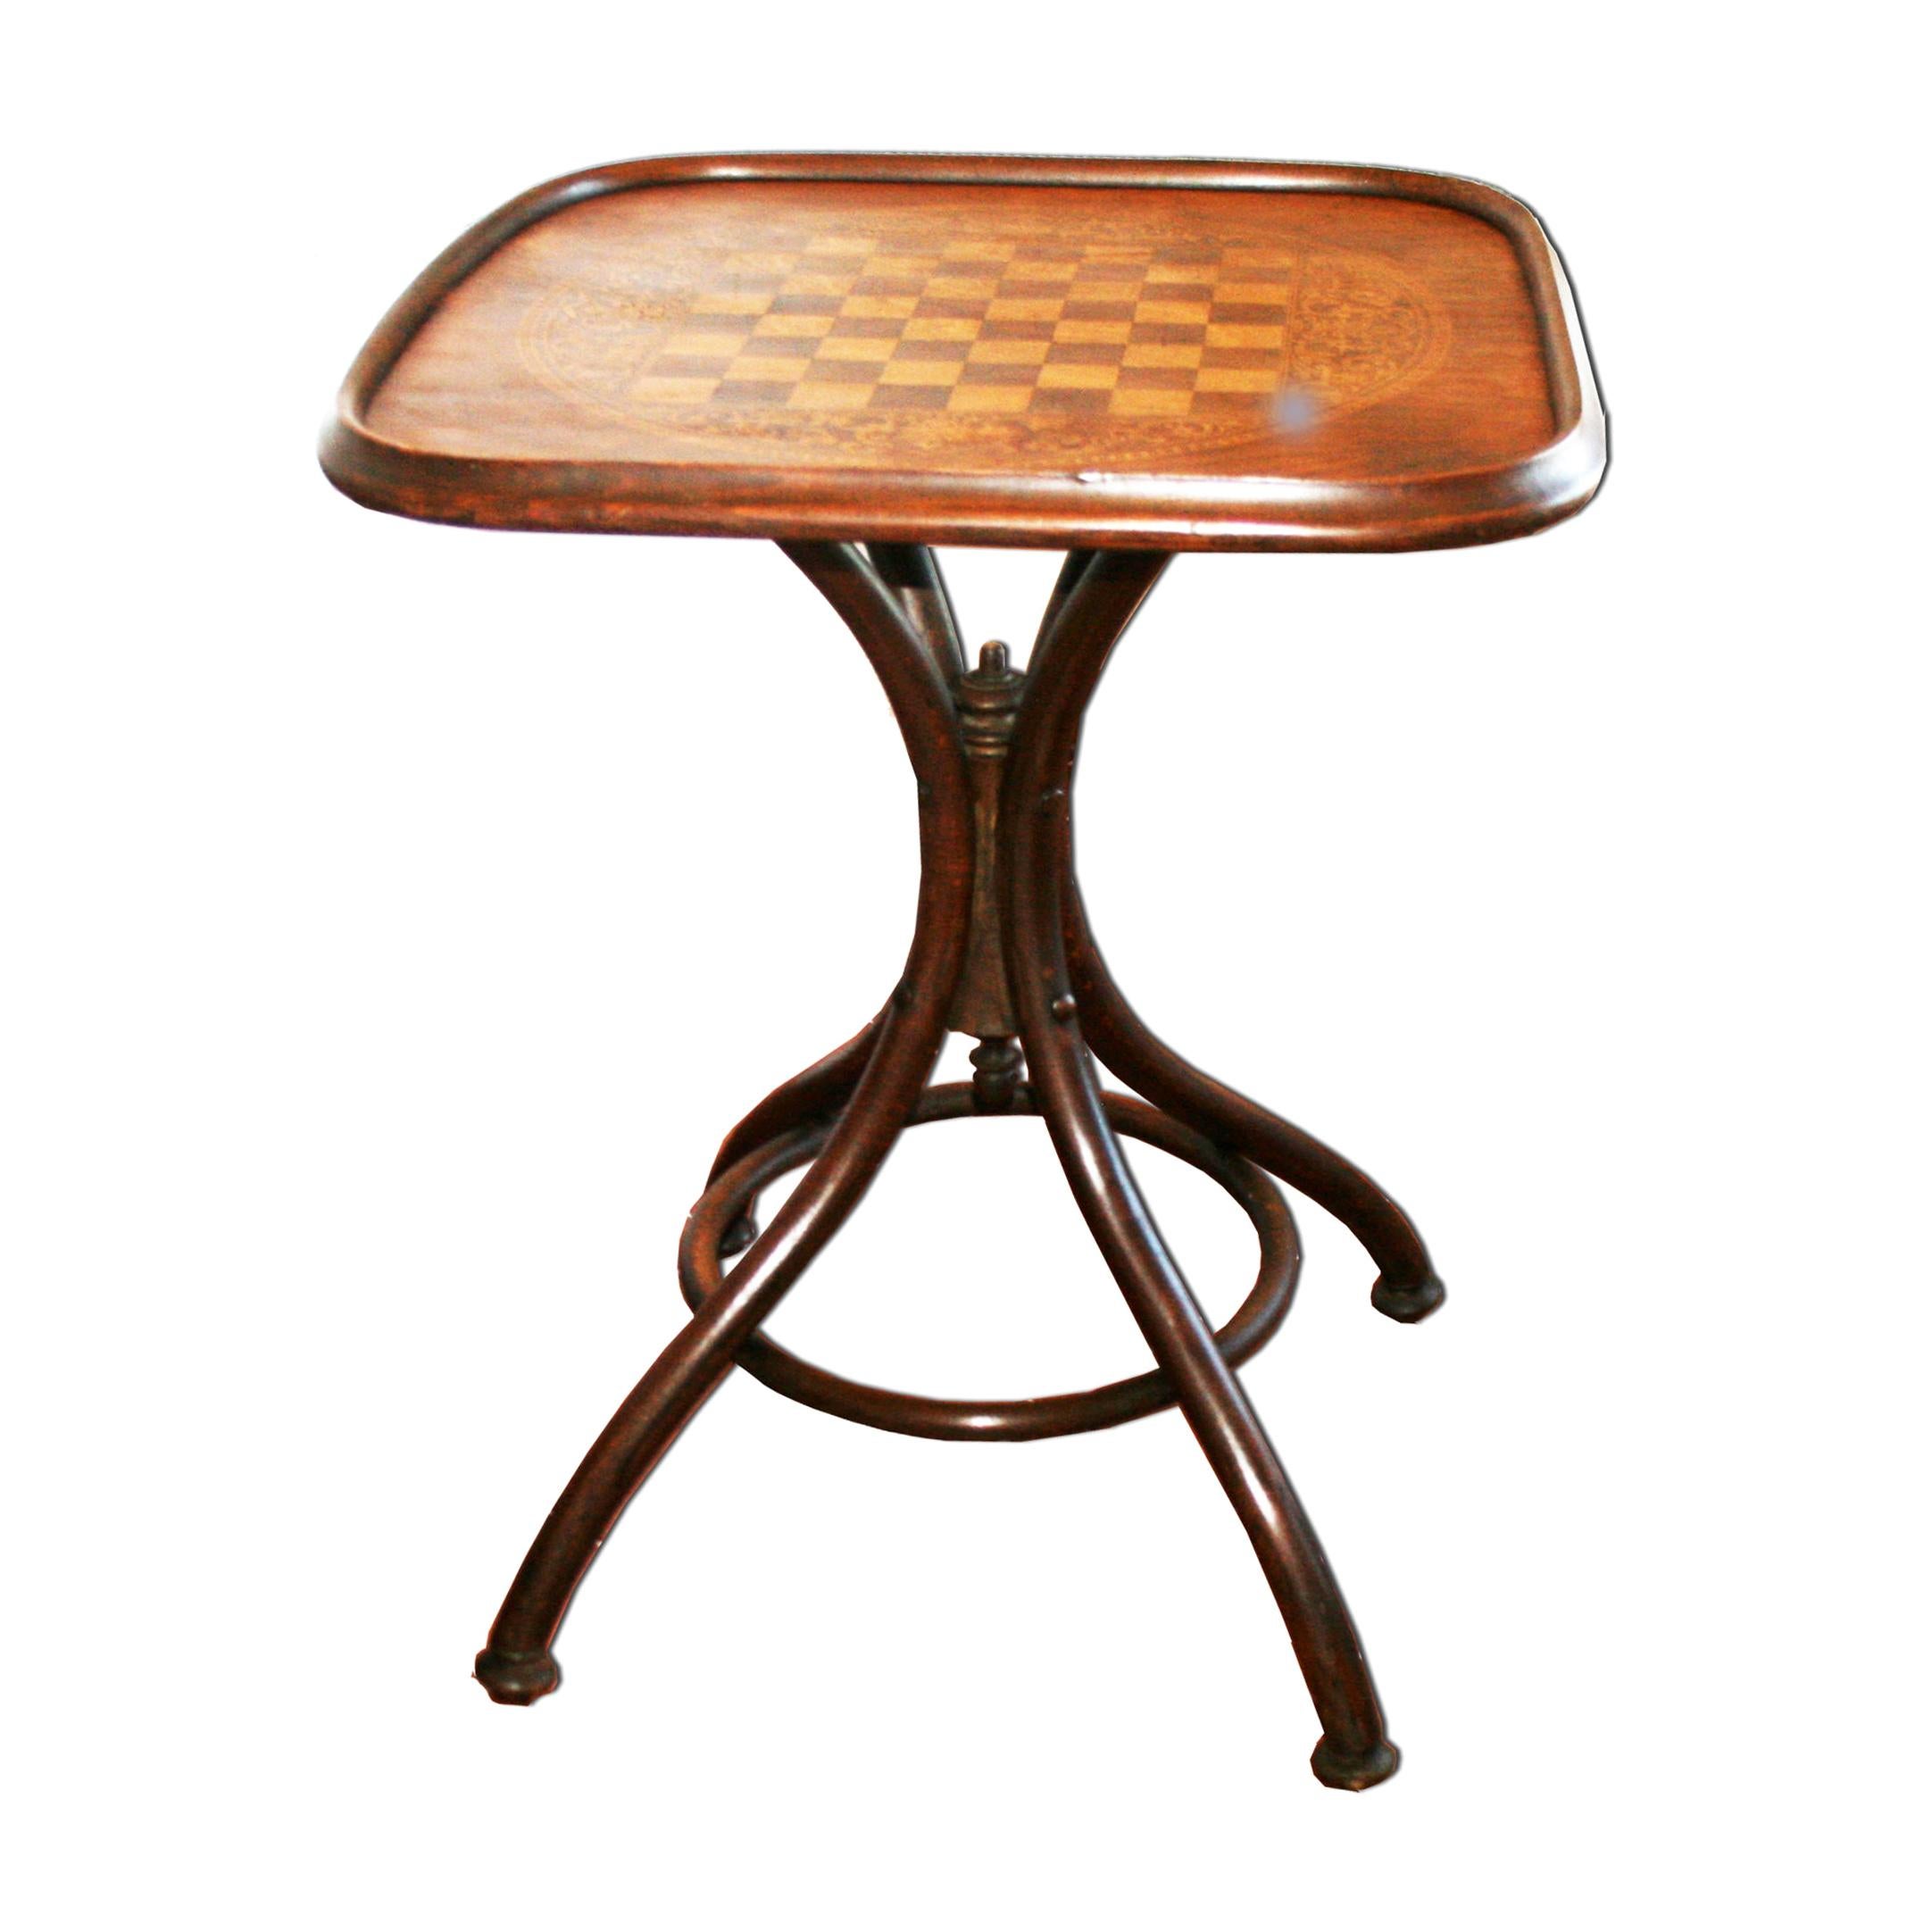 Thonet Style Bentwood Game Table, Late 19th Century or Early 20th Century